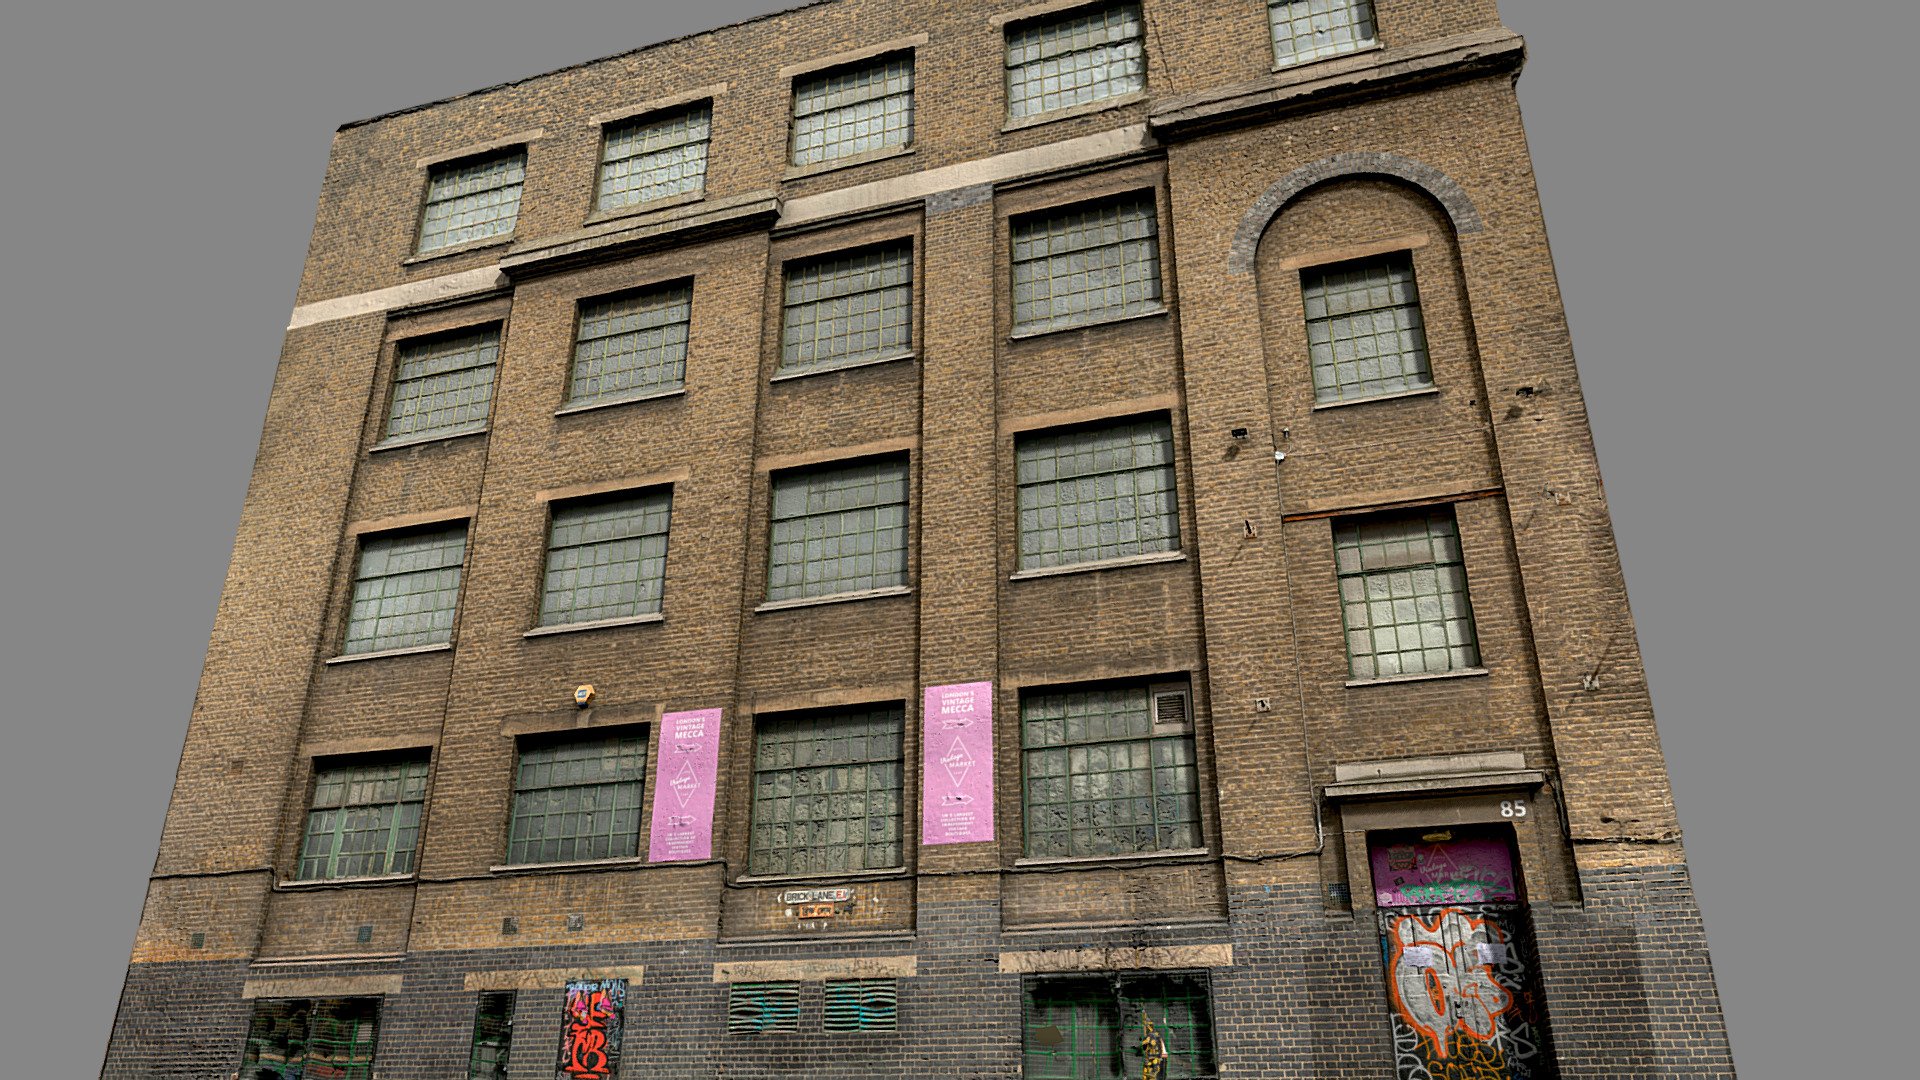 Building scan No. 10

London, Brick Lane. The Truman Brewery Markets
High poly model ideal for photorealistic renders

16k original textures, 8k rendering in sketchfab

Urban &amp; Industrial collections

Good for adding realism to your industrial / abandoned scenes

diffuse/normal/specular - Building scan No. 10 - London, Brick Lane - Buy Royalty Free 3D model by 3Dystopia (@Dystopia) 3d model